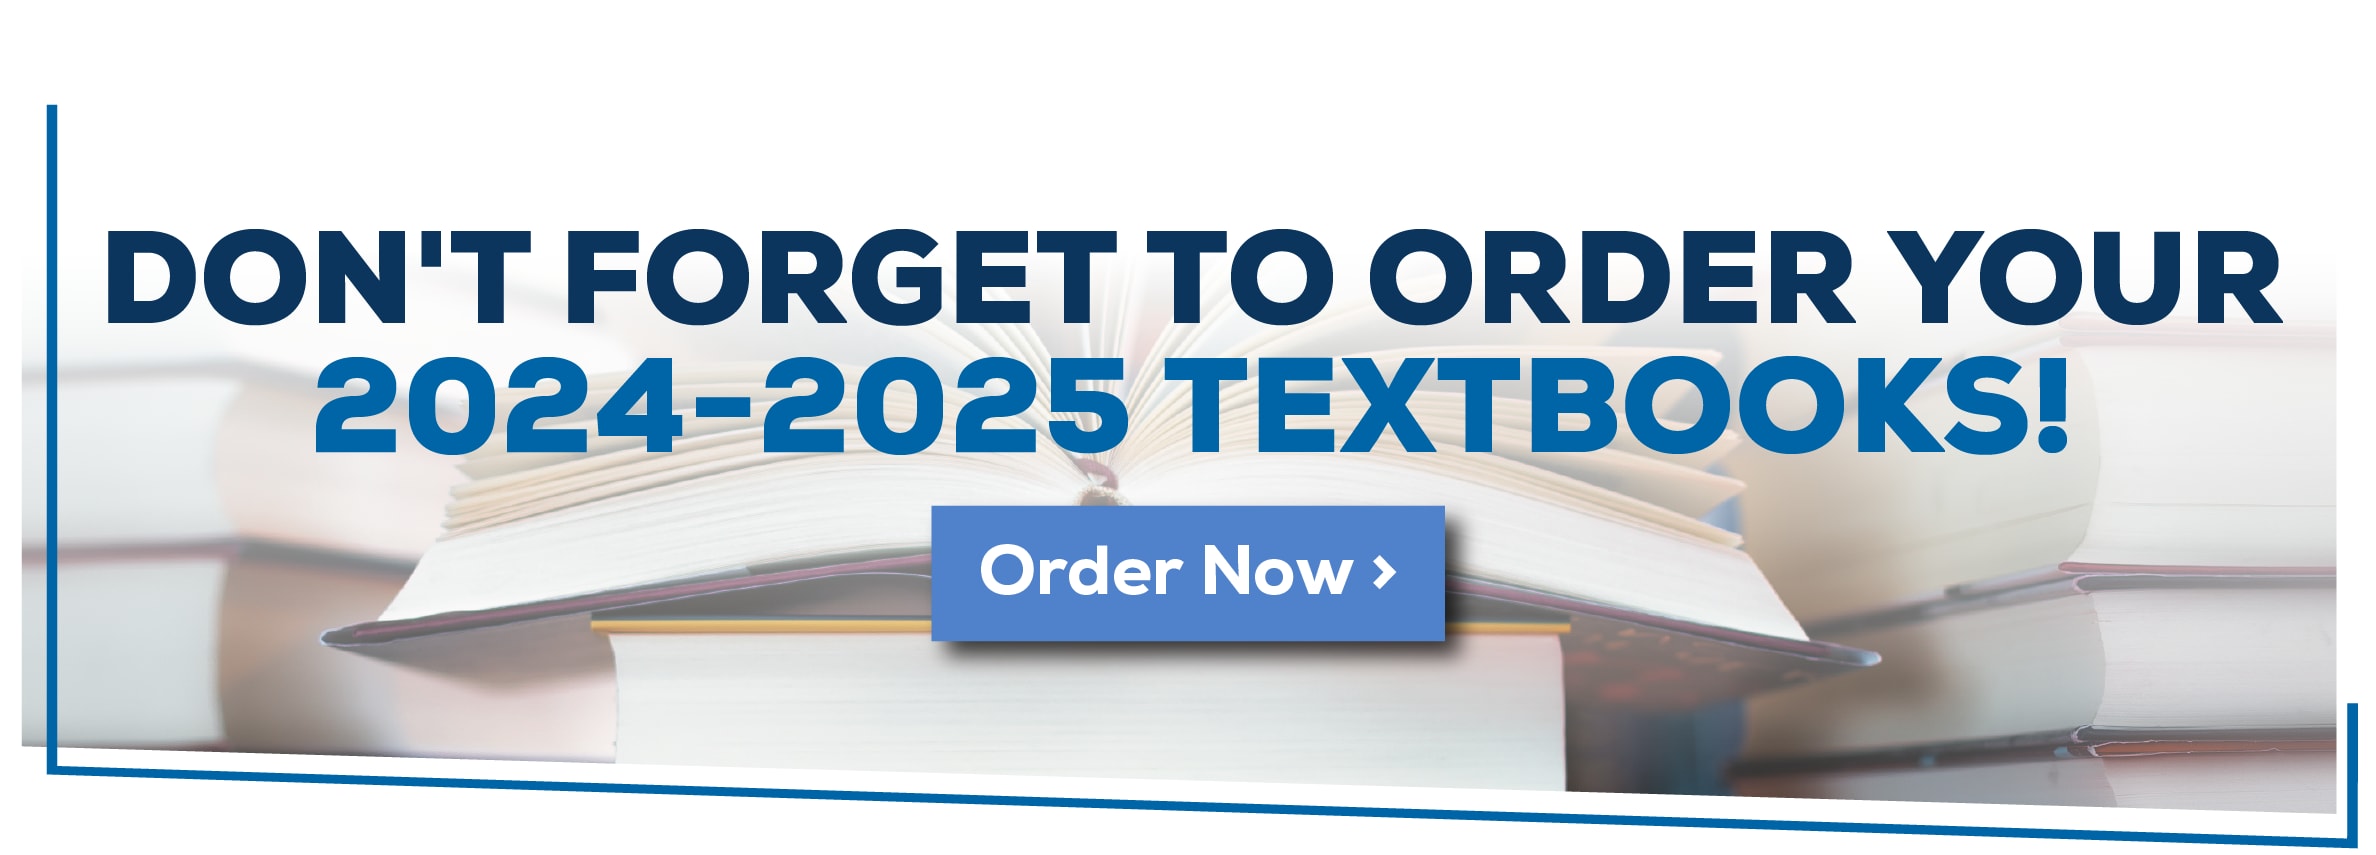 Don't forget to order your 2024-2025 textbooks! Order Now!